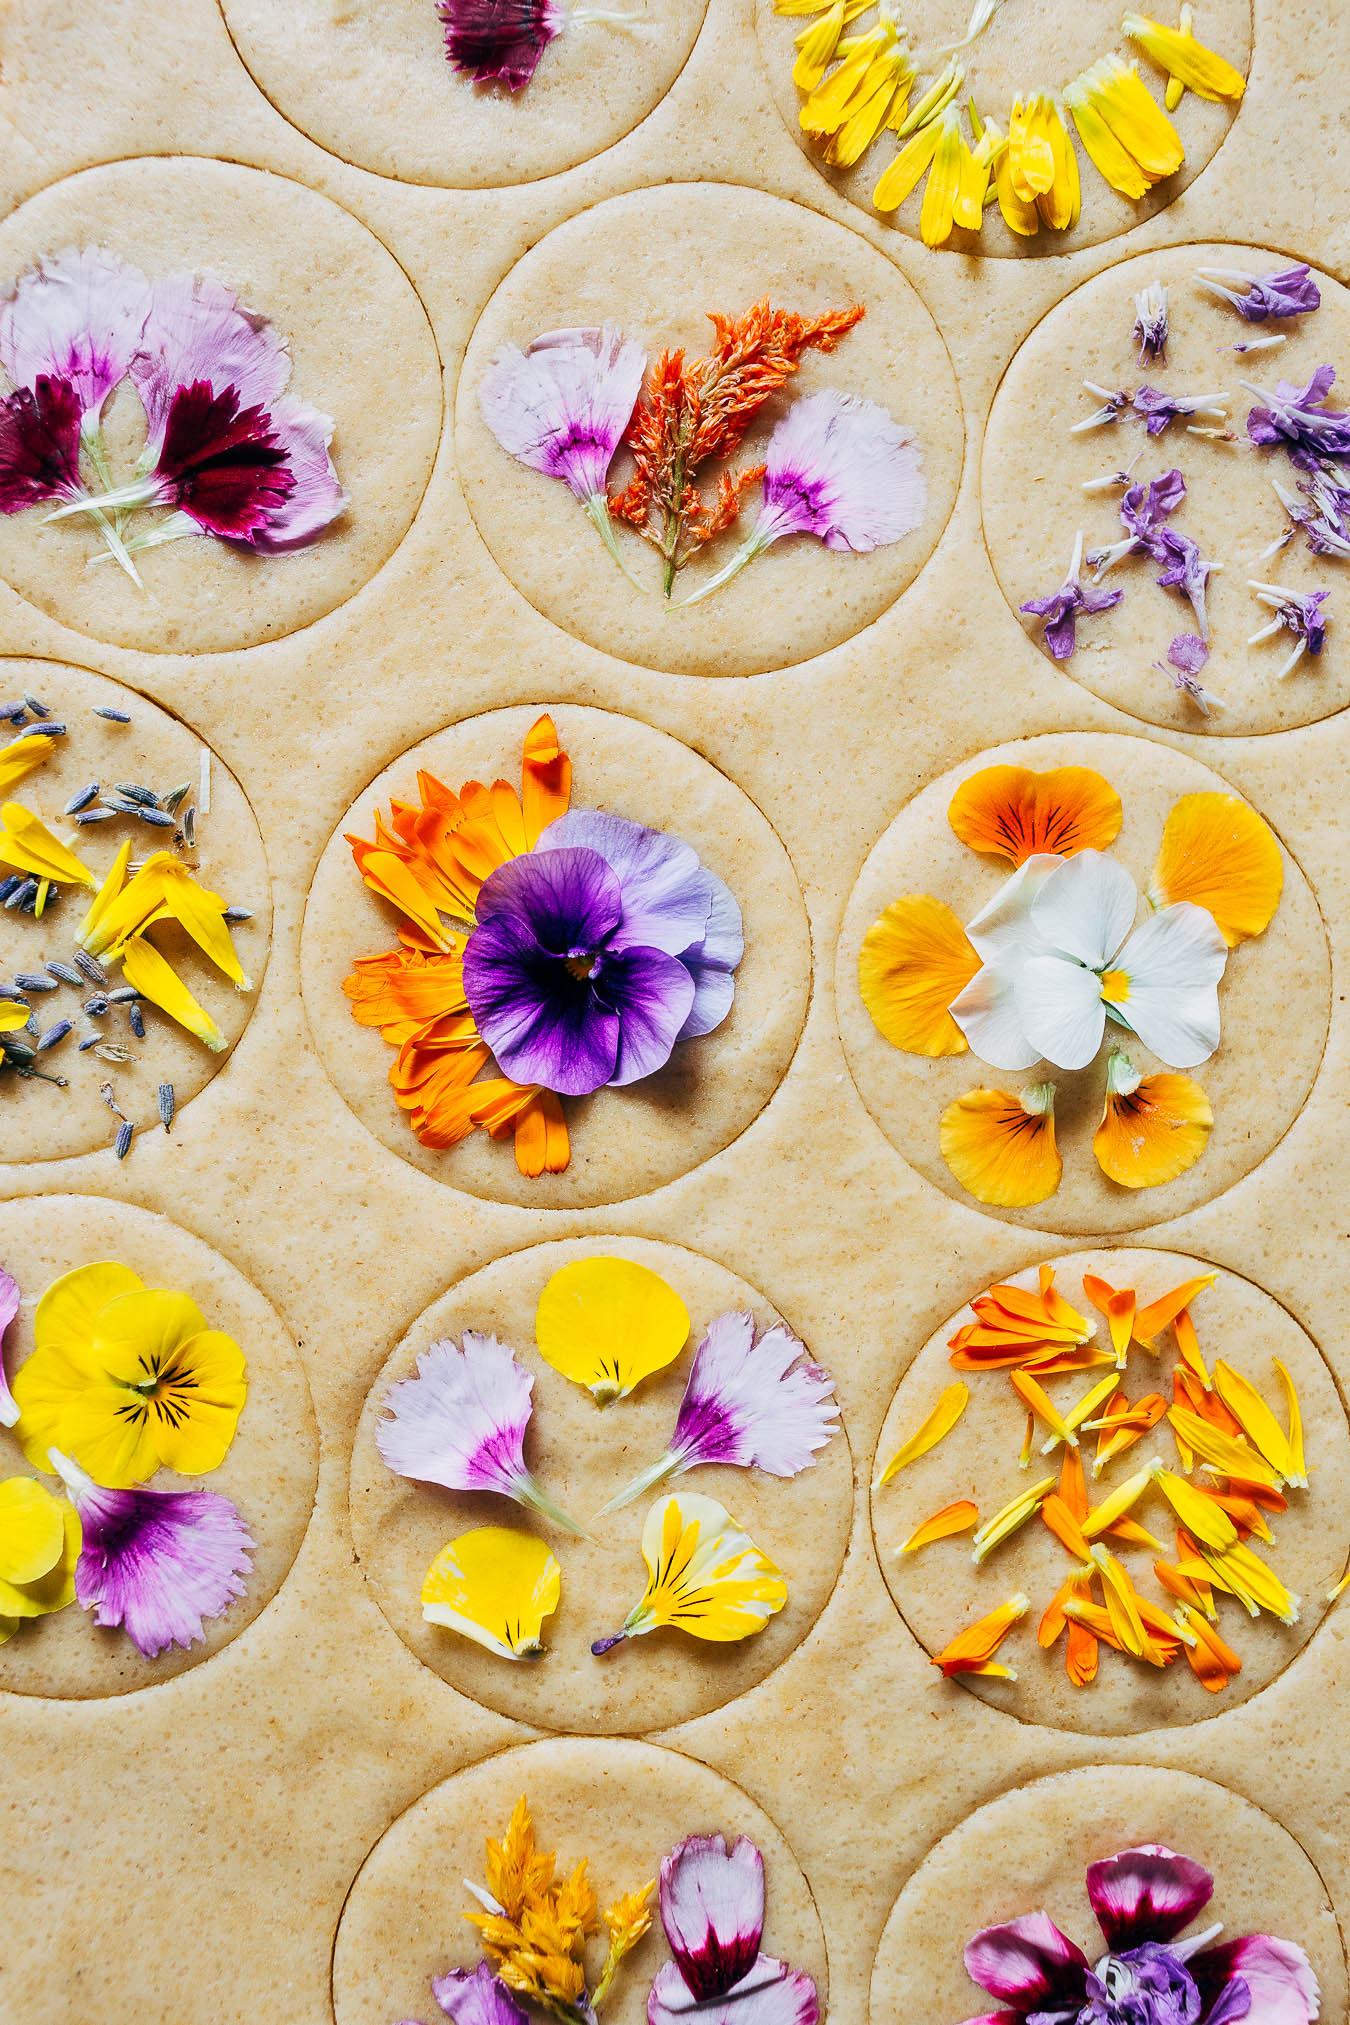 Cookie dough cutouts topped with edible flower petals.